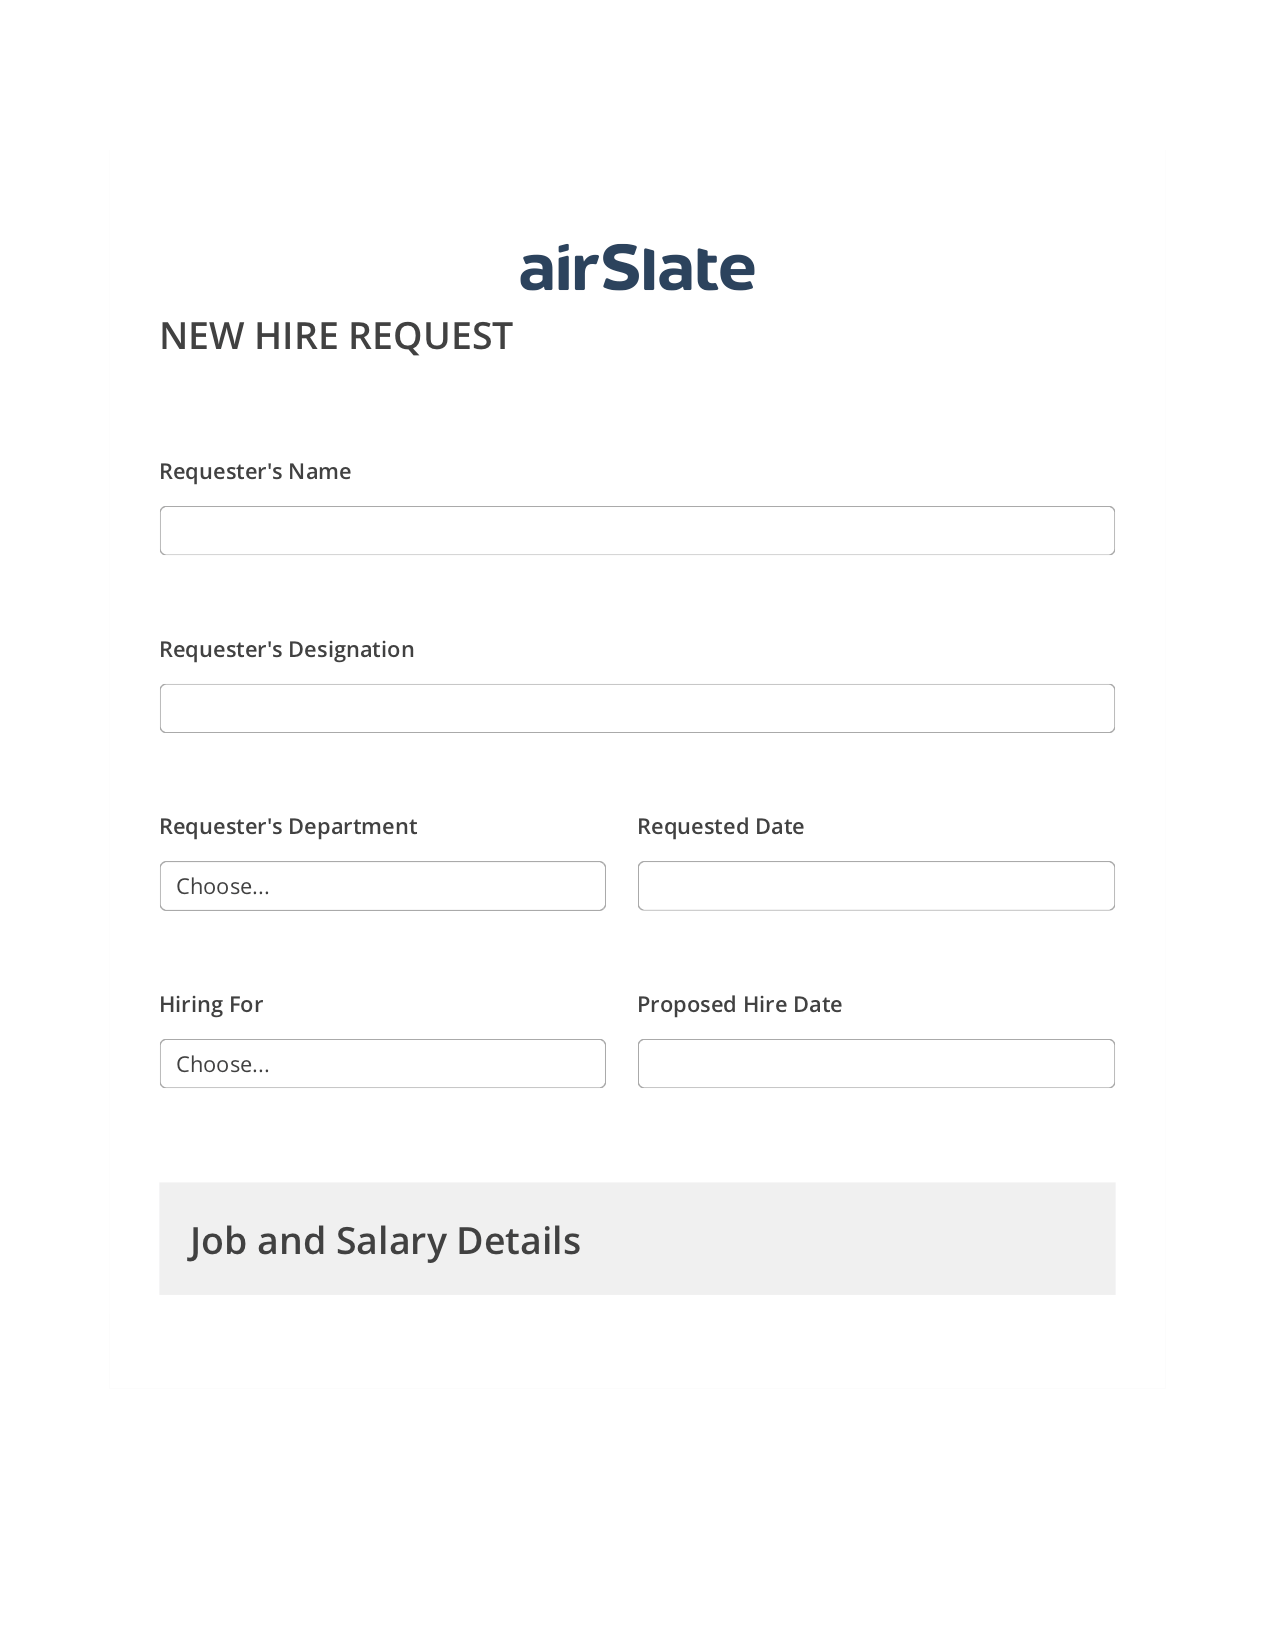 Hiring Request Workflow Pre-fill from another Slate Bot, Create slate bot, Export to MySQL Bot